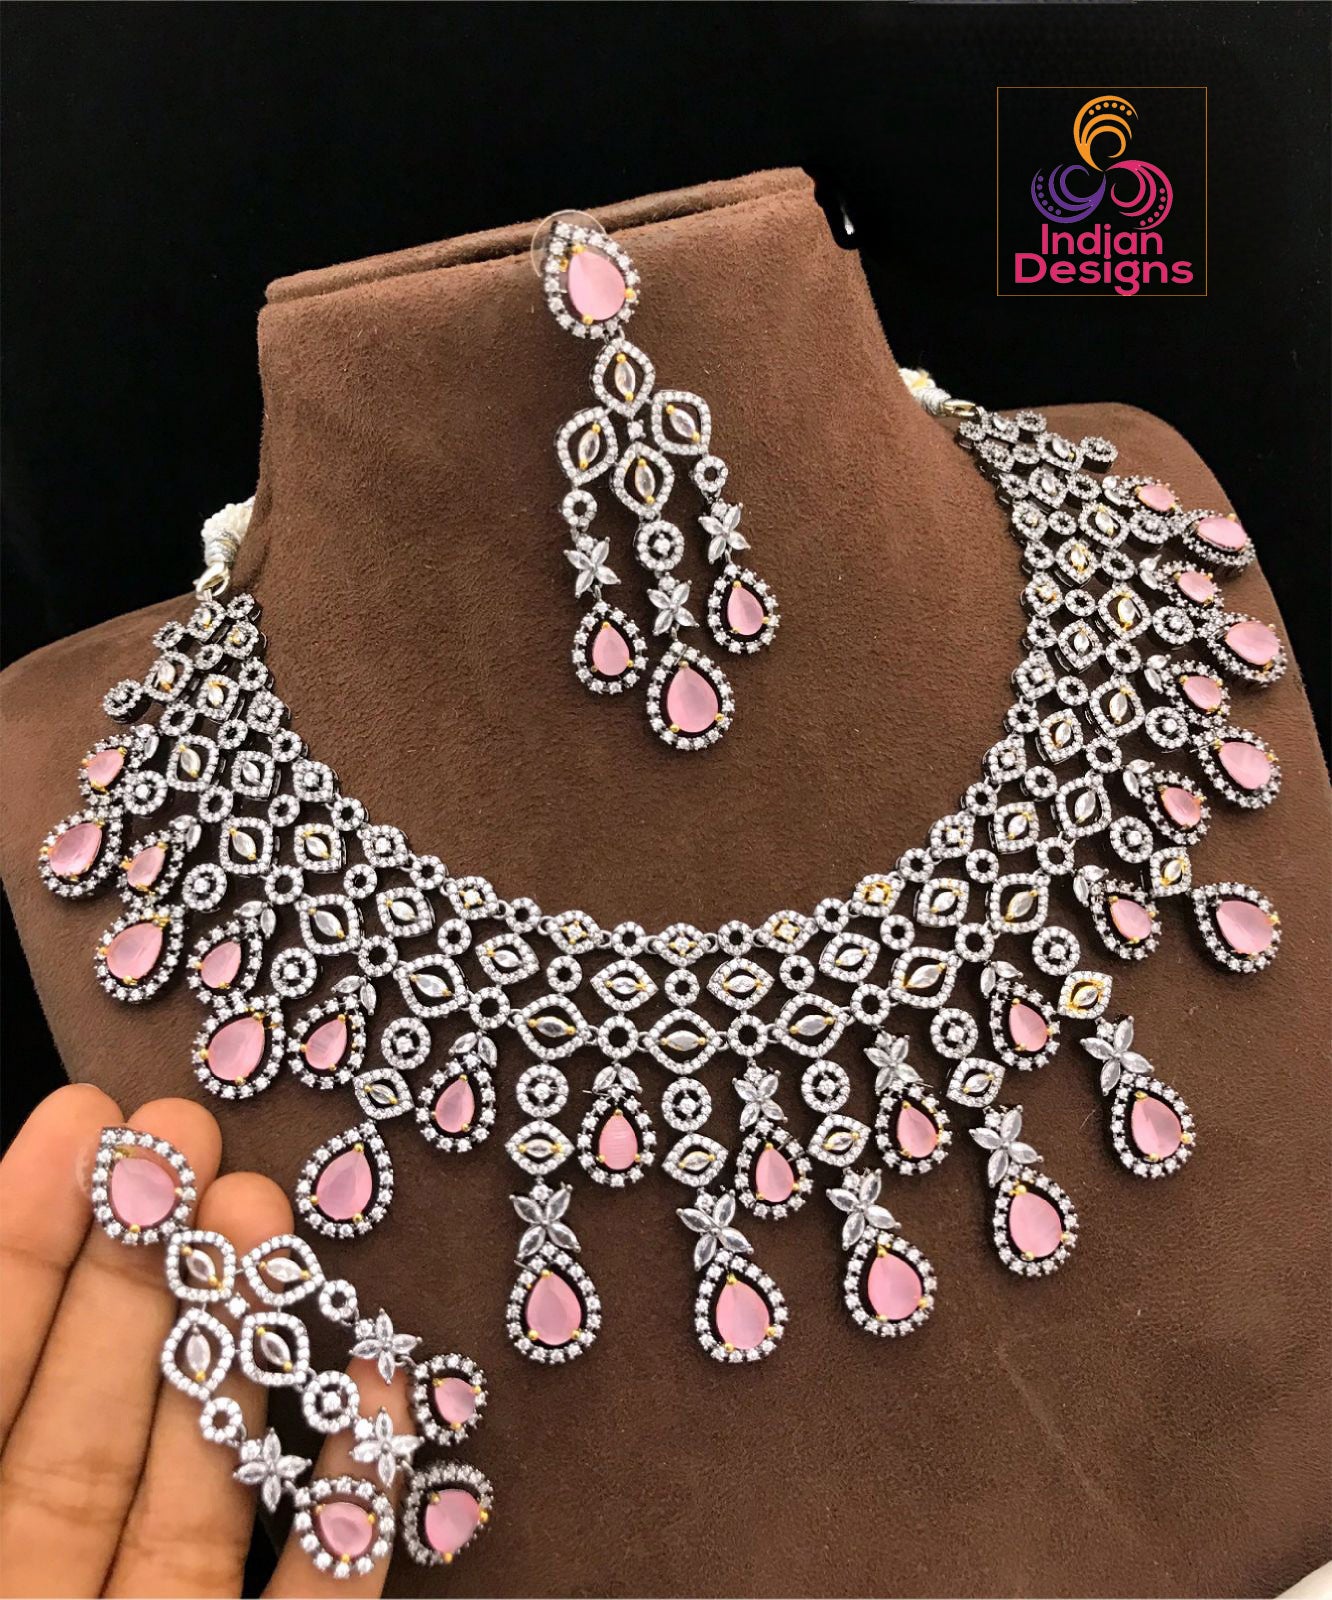 Luxury Victorian Finish American Diamond Wedding Jewelry | Statement Necklace | Indian Bollywood Style CZ Diamond Choker set | Gift for her